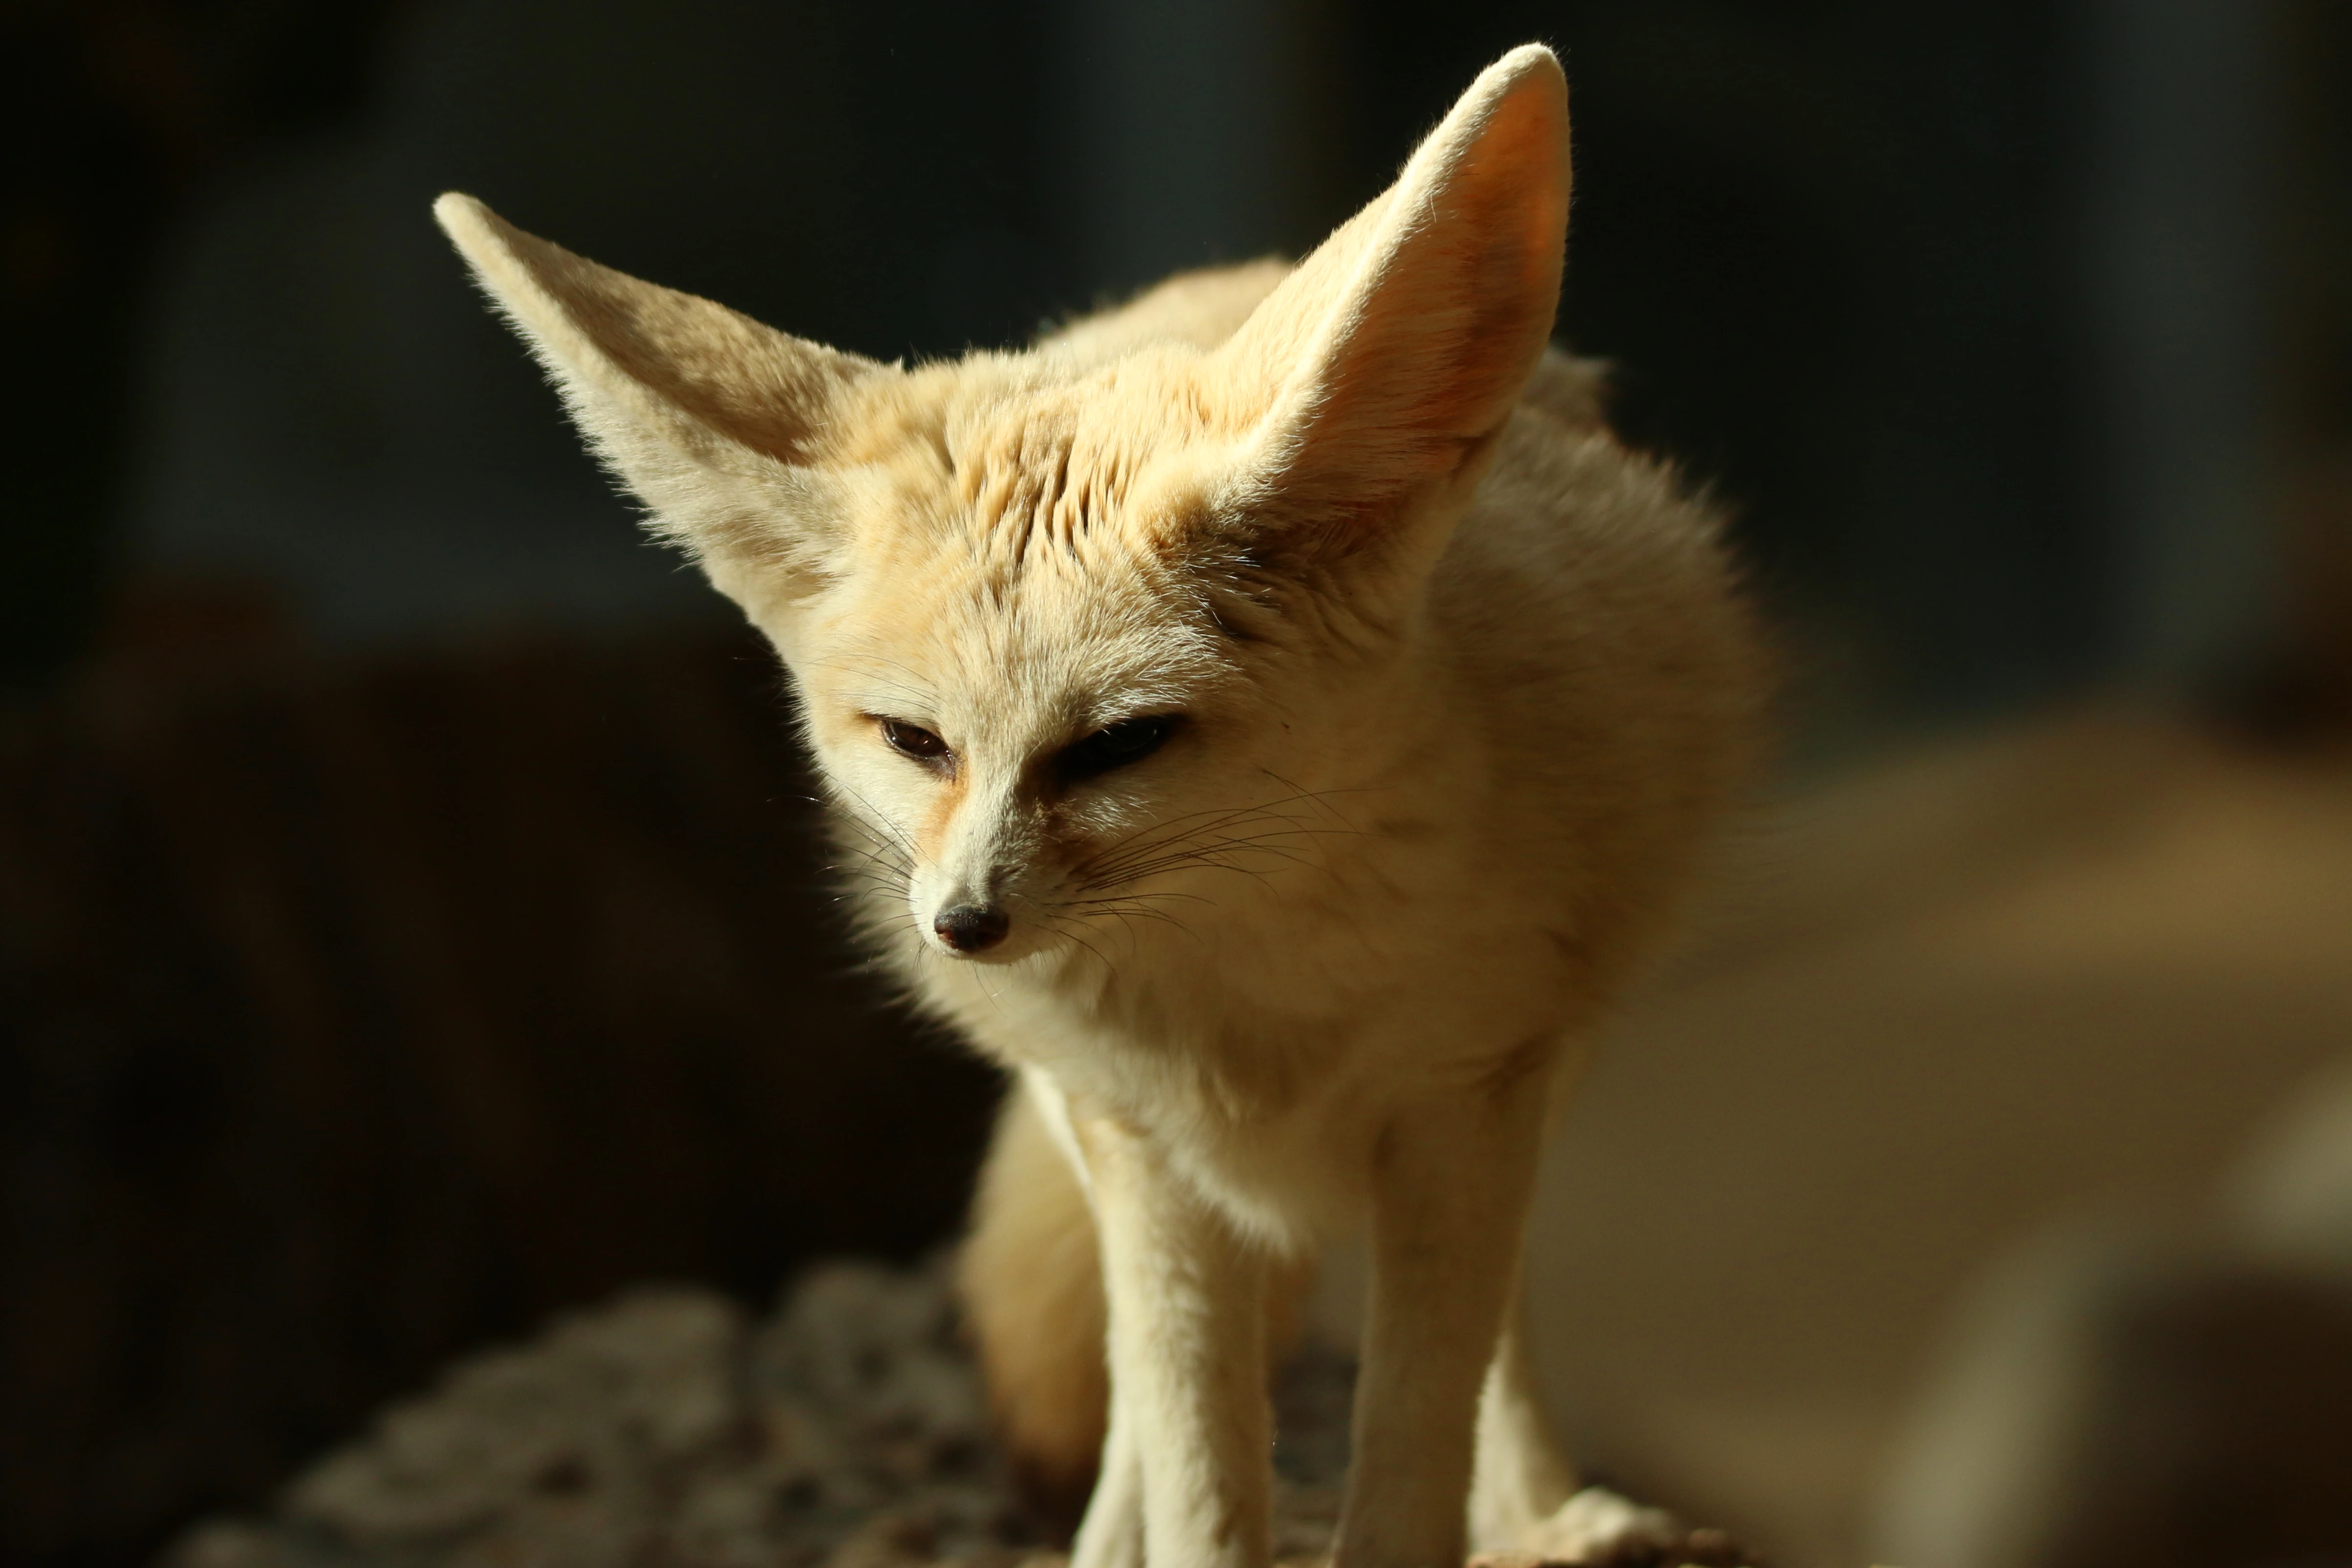 A fennec fox standing on a large tree log. Background is mostly out of focus.